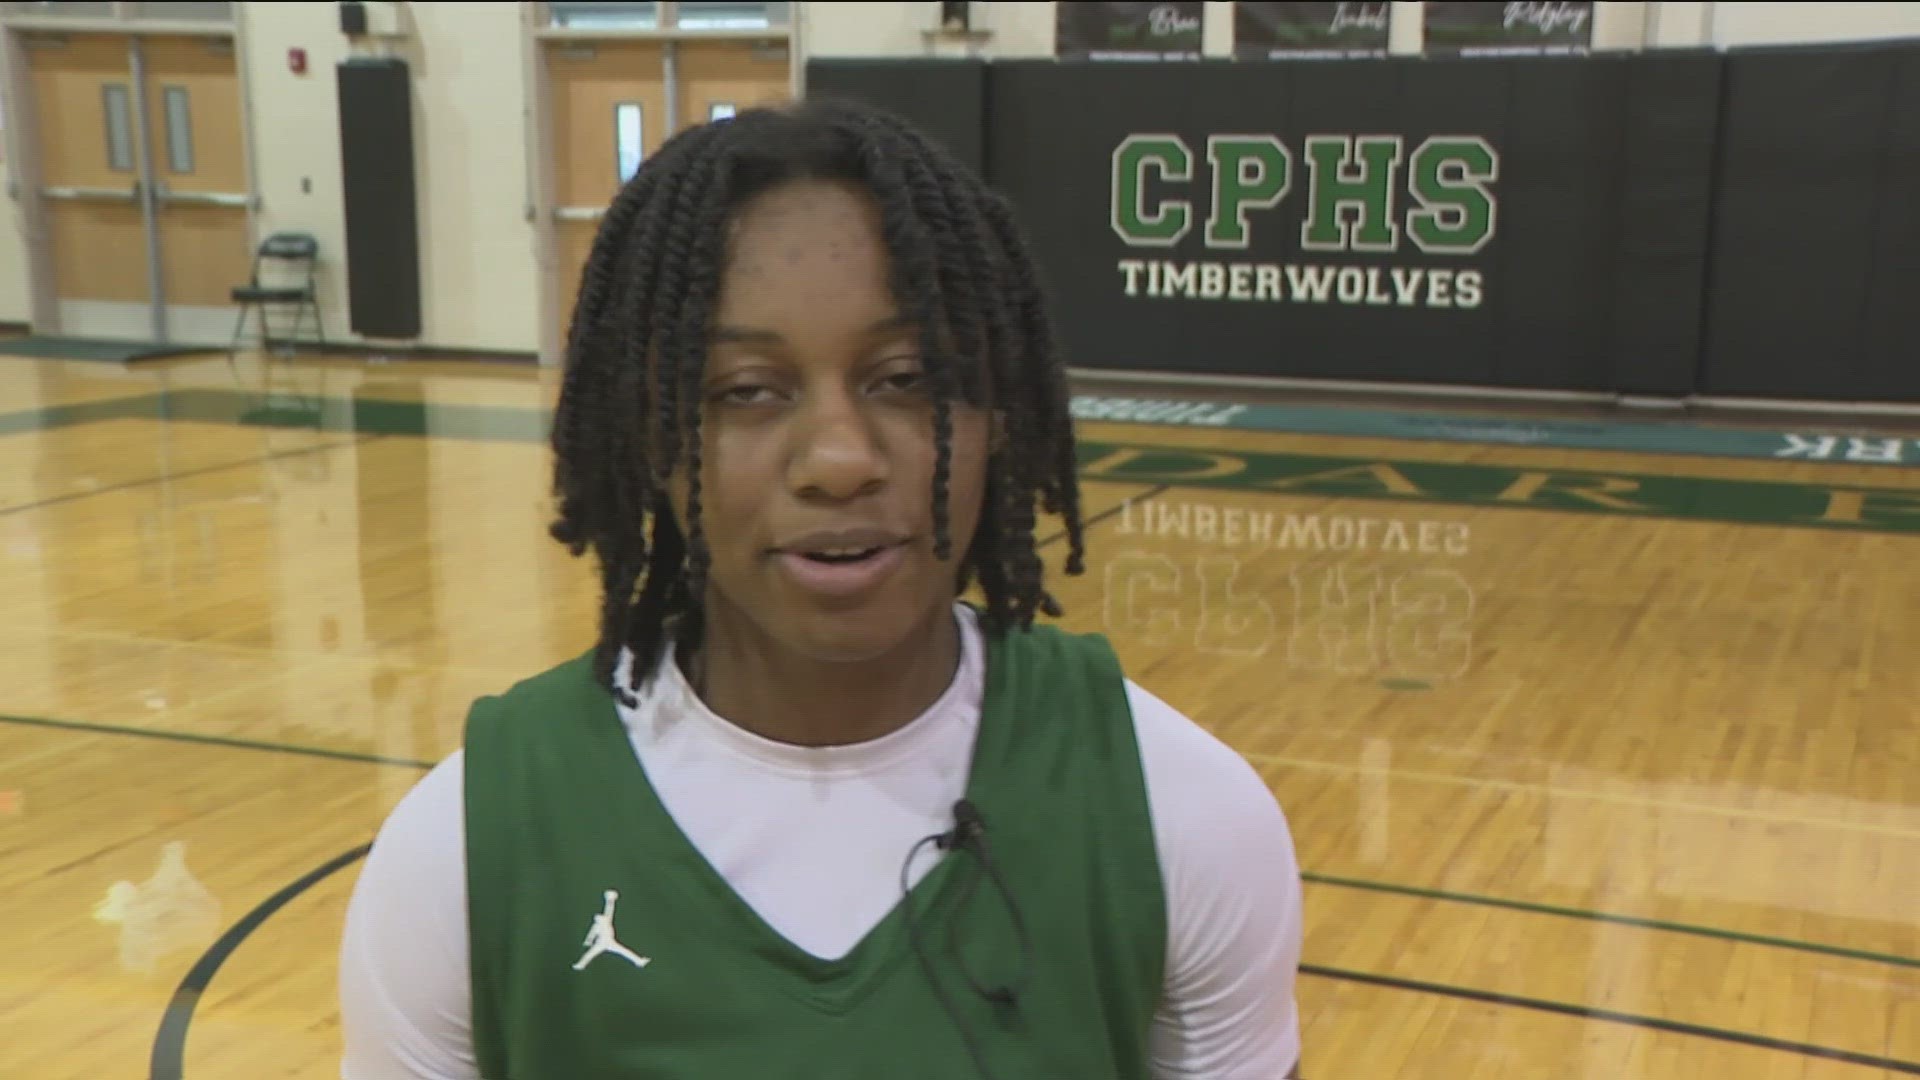 Cedar Park girls basketball's Hope Edwards is our Athlete of the Week! She has 1,000+ career points and is a junior at Cedar Park High School.